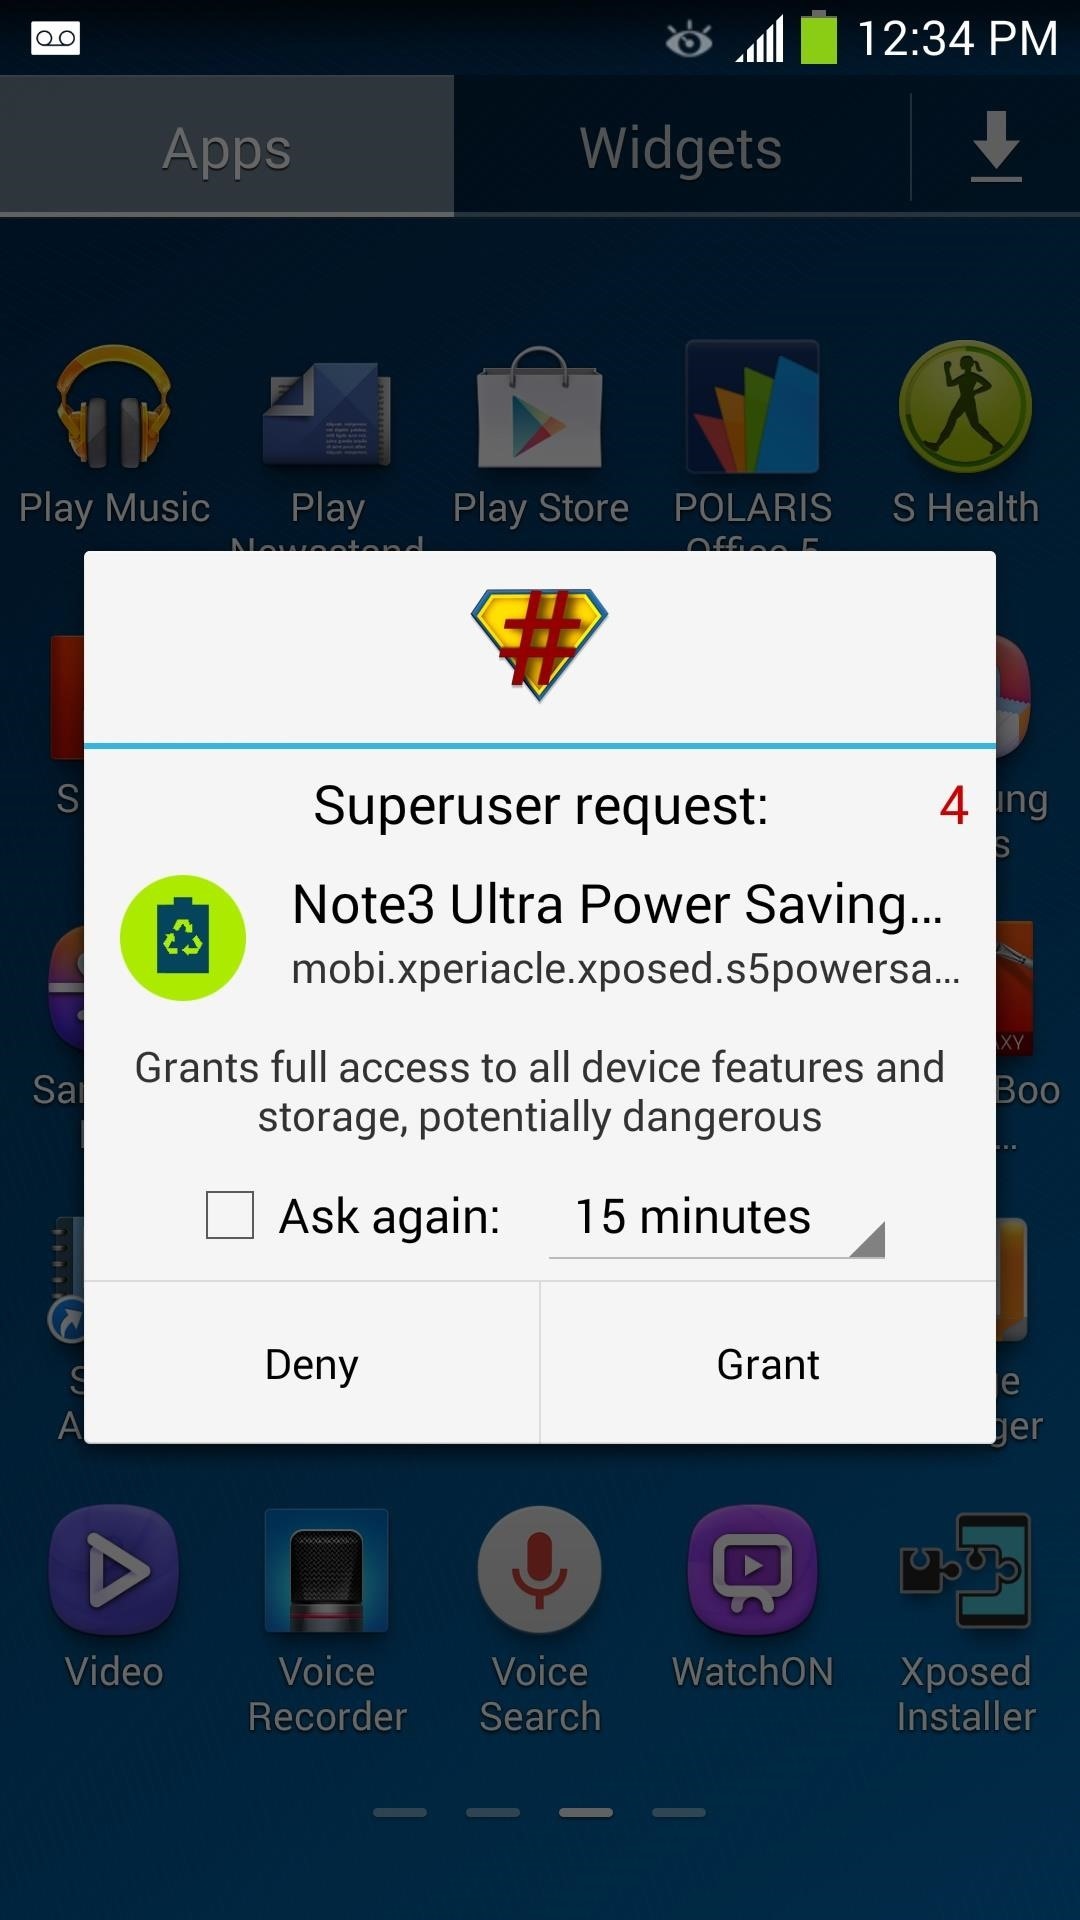 Get the Galaxy S5's Ultra Power Saving Mode on Your Note 3